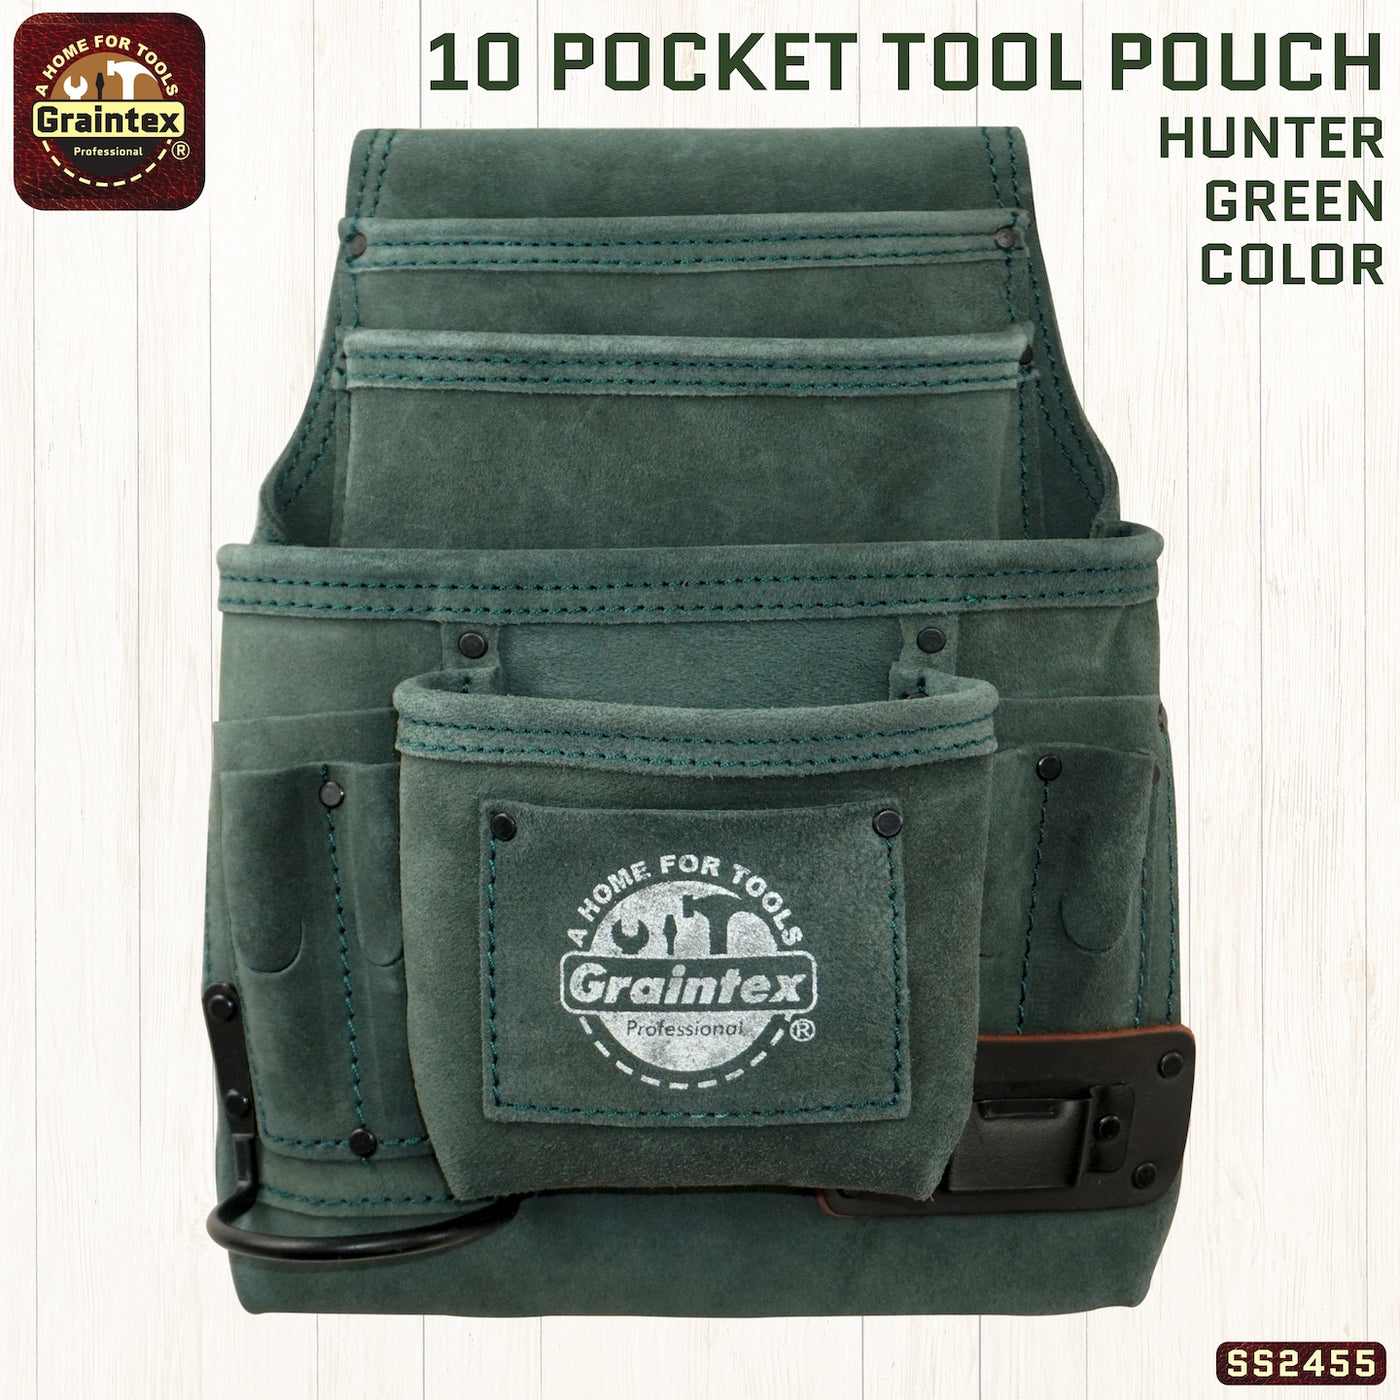 SS2455 :: 10 Pocket Nail & Tool Pouch Hunter Green Color Suede Leather